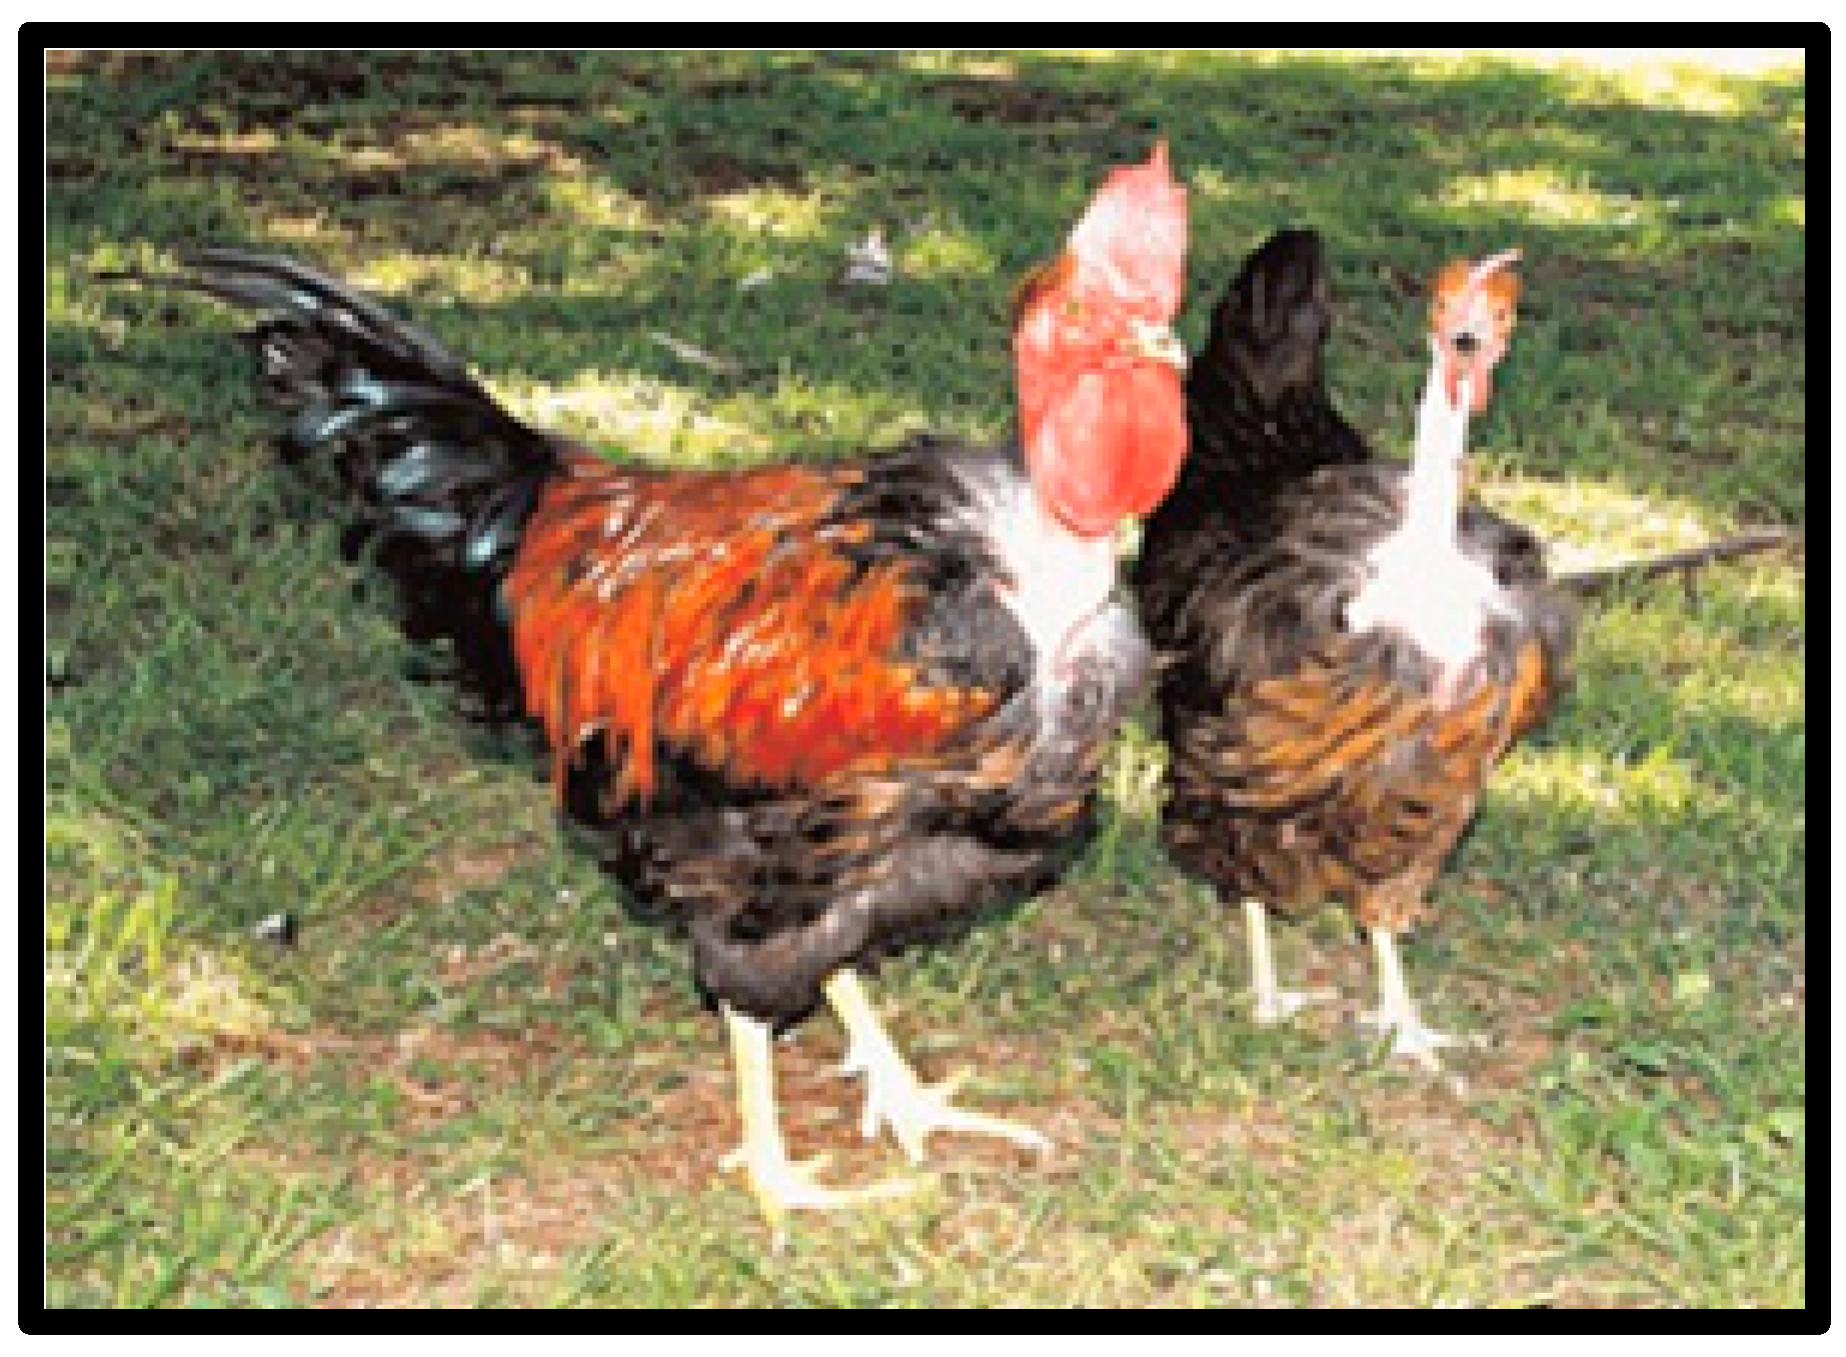 breeds of fowl